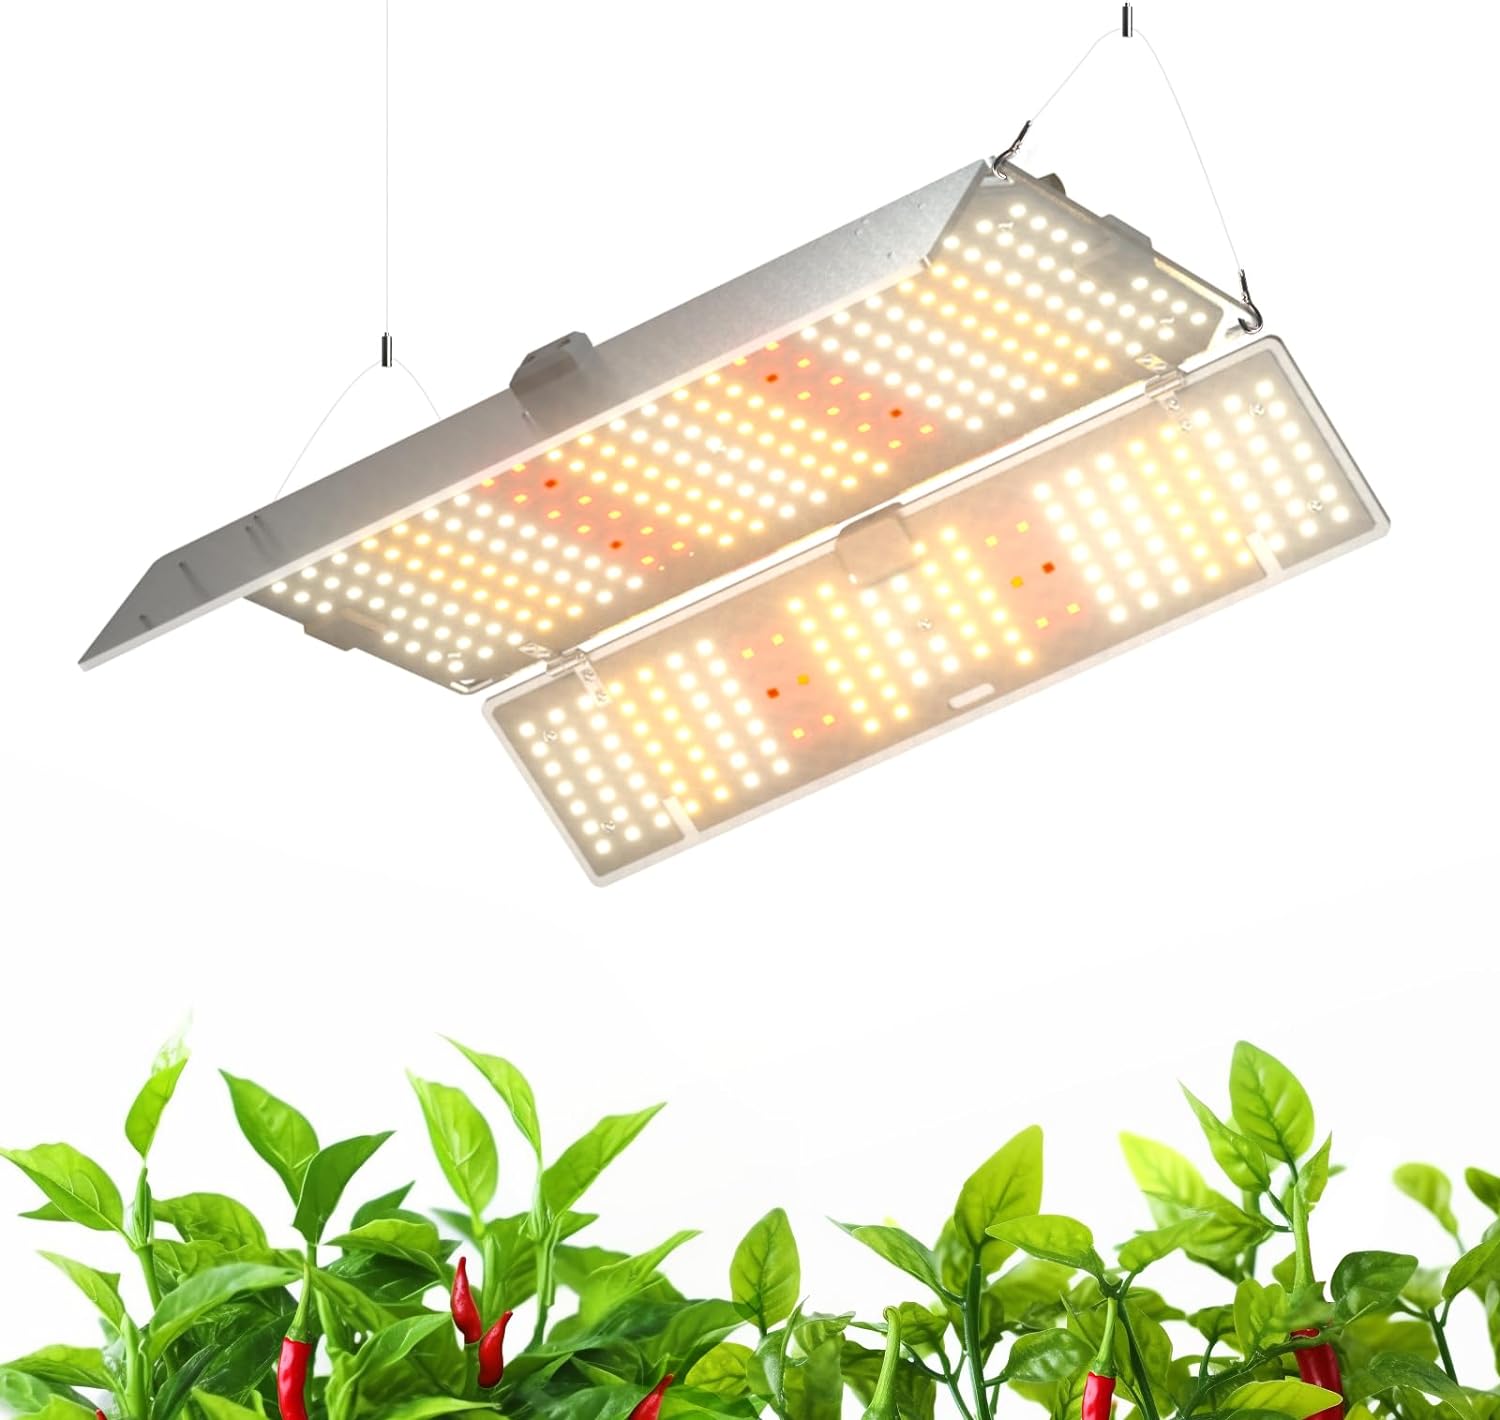 Barrina BU2000 LED Grow Light, Full Spectrum with IR, 4x4FT Coverage, Dimmable, Adjustable Light Panel, 816 LEDs, High PPFD, Plant Grow Light for Indoor Plants Seedling Growing Flowering Fruiting